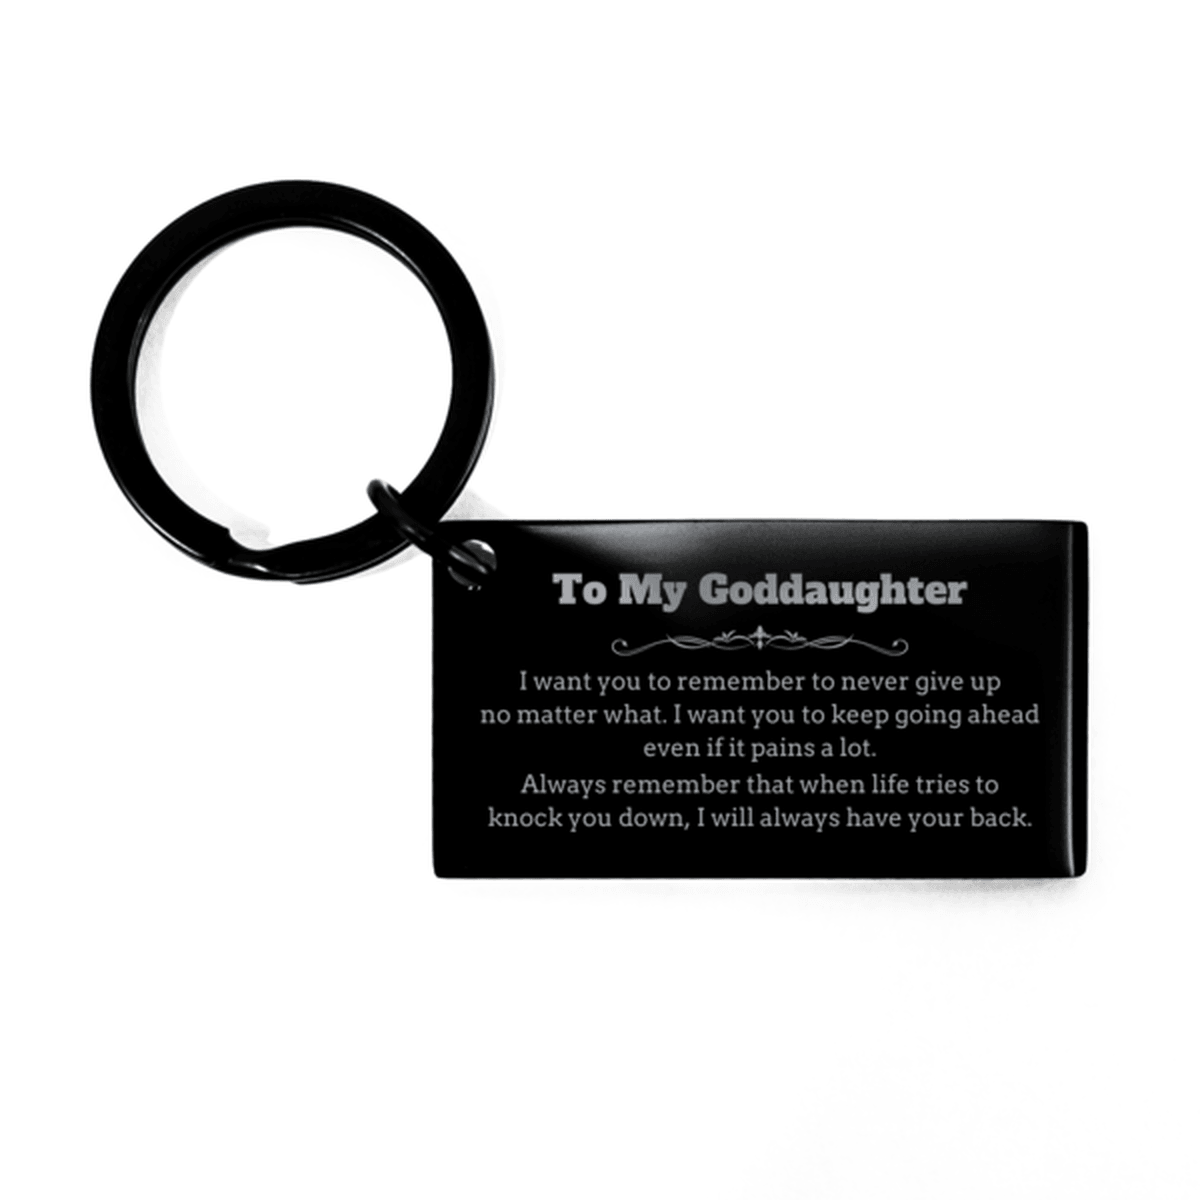 To My Goddaughter Gifts, Never give up no matter what, Inspirational Goddaughter Keychain, Encouragement Birthday Christmas Unique Gifts For Goddaughter - Mallard Moon Gift Shop